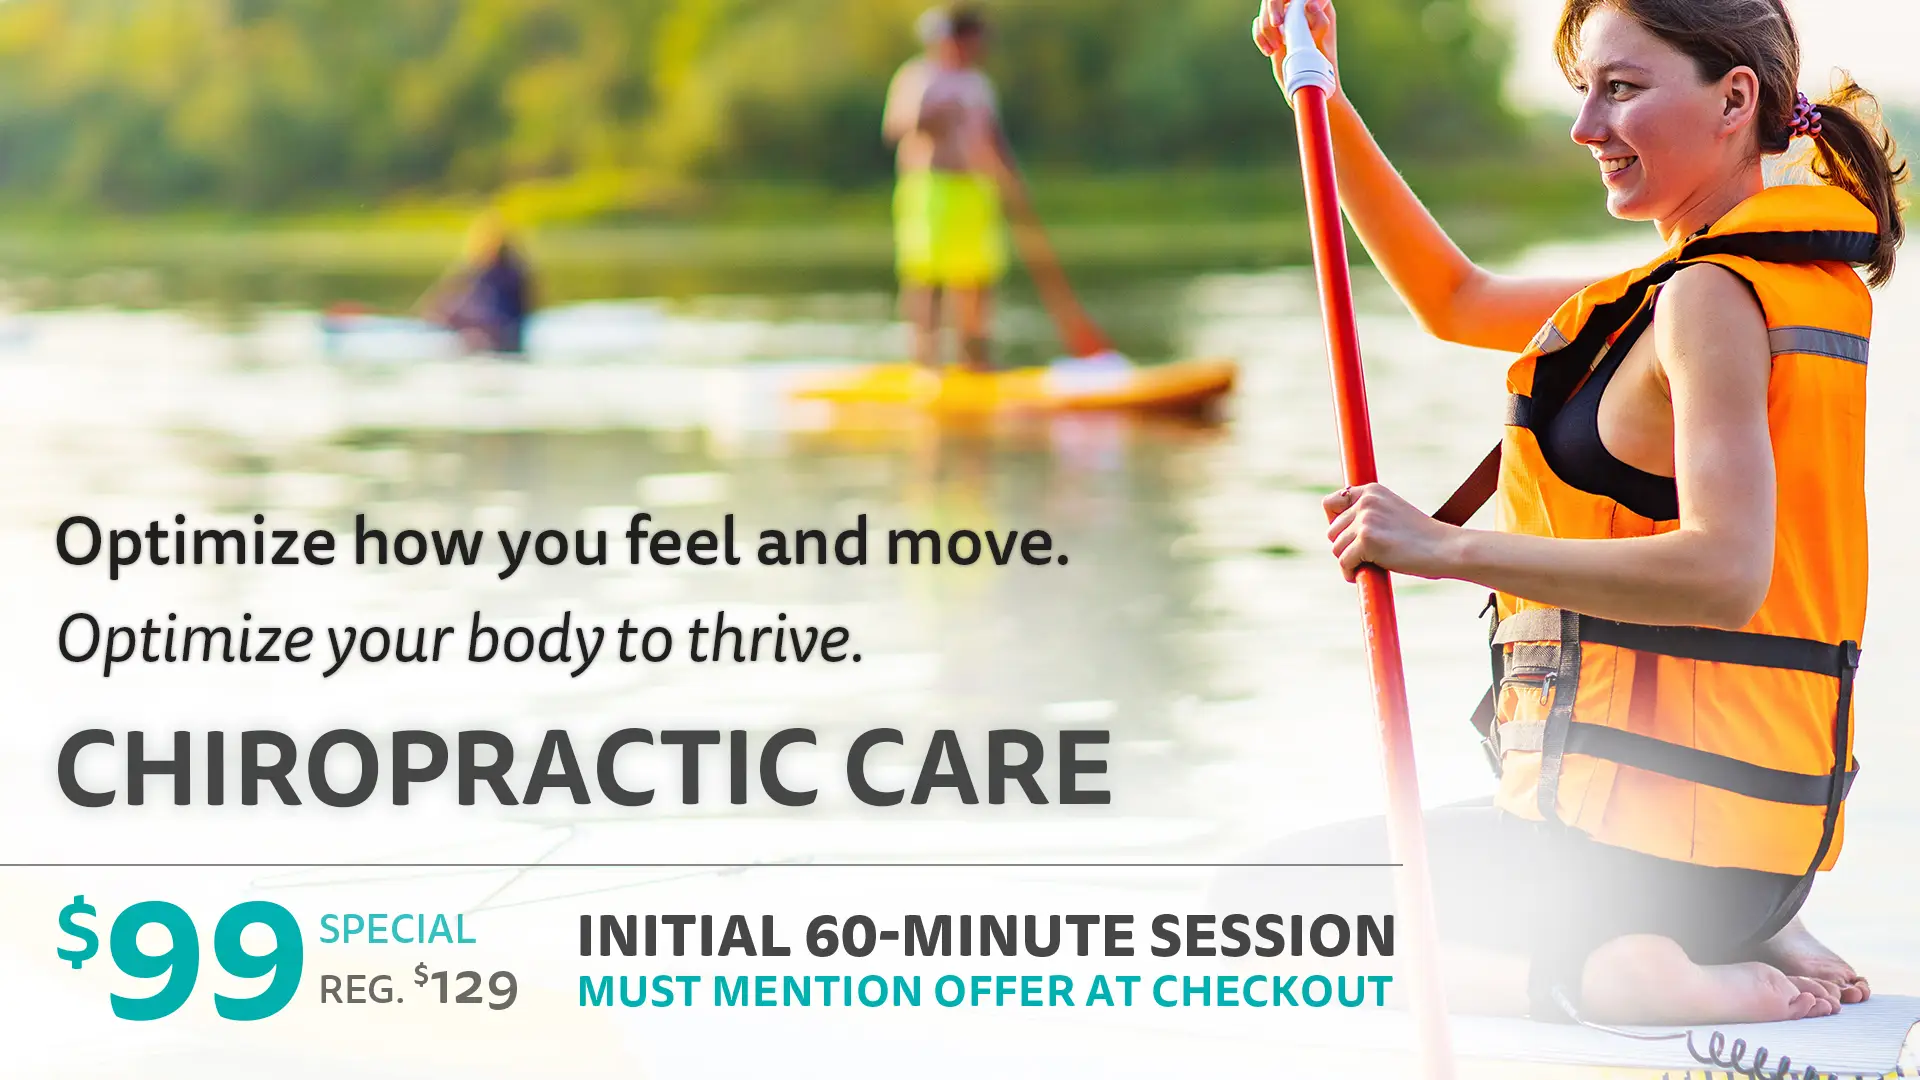 Chiropractic Care Special Offer at Thrive Proactive Health